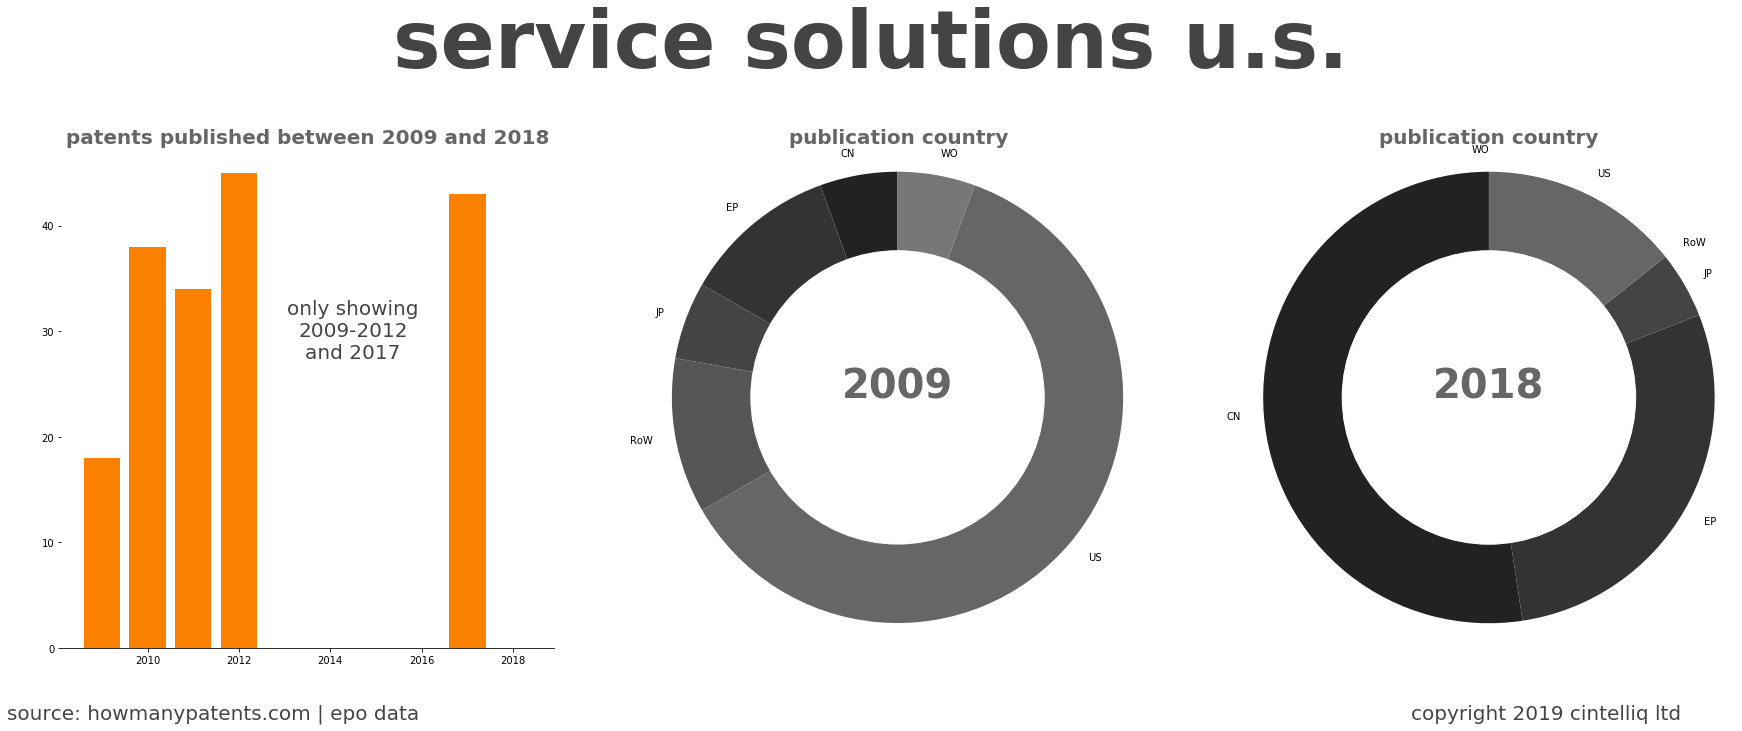 summary of patents for Service Solutions U.S.